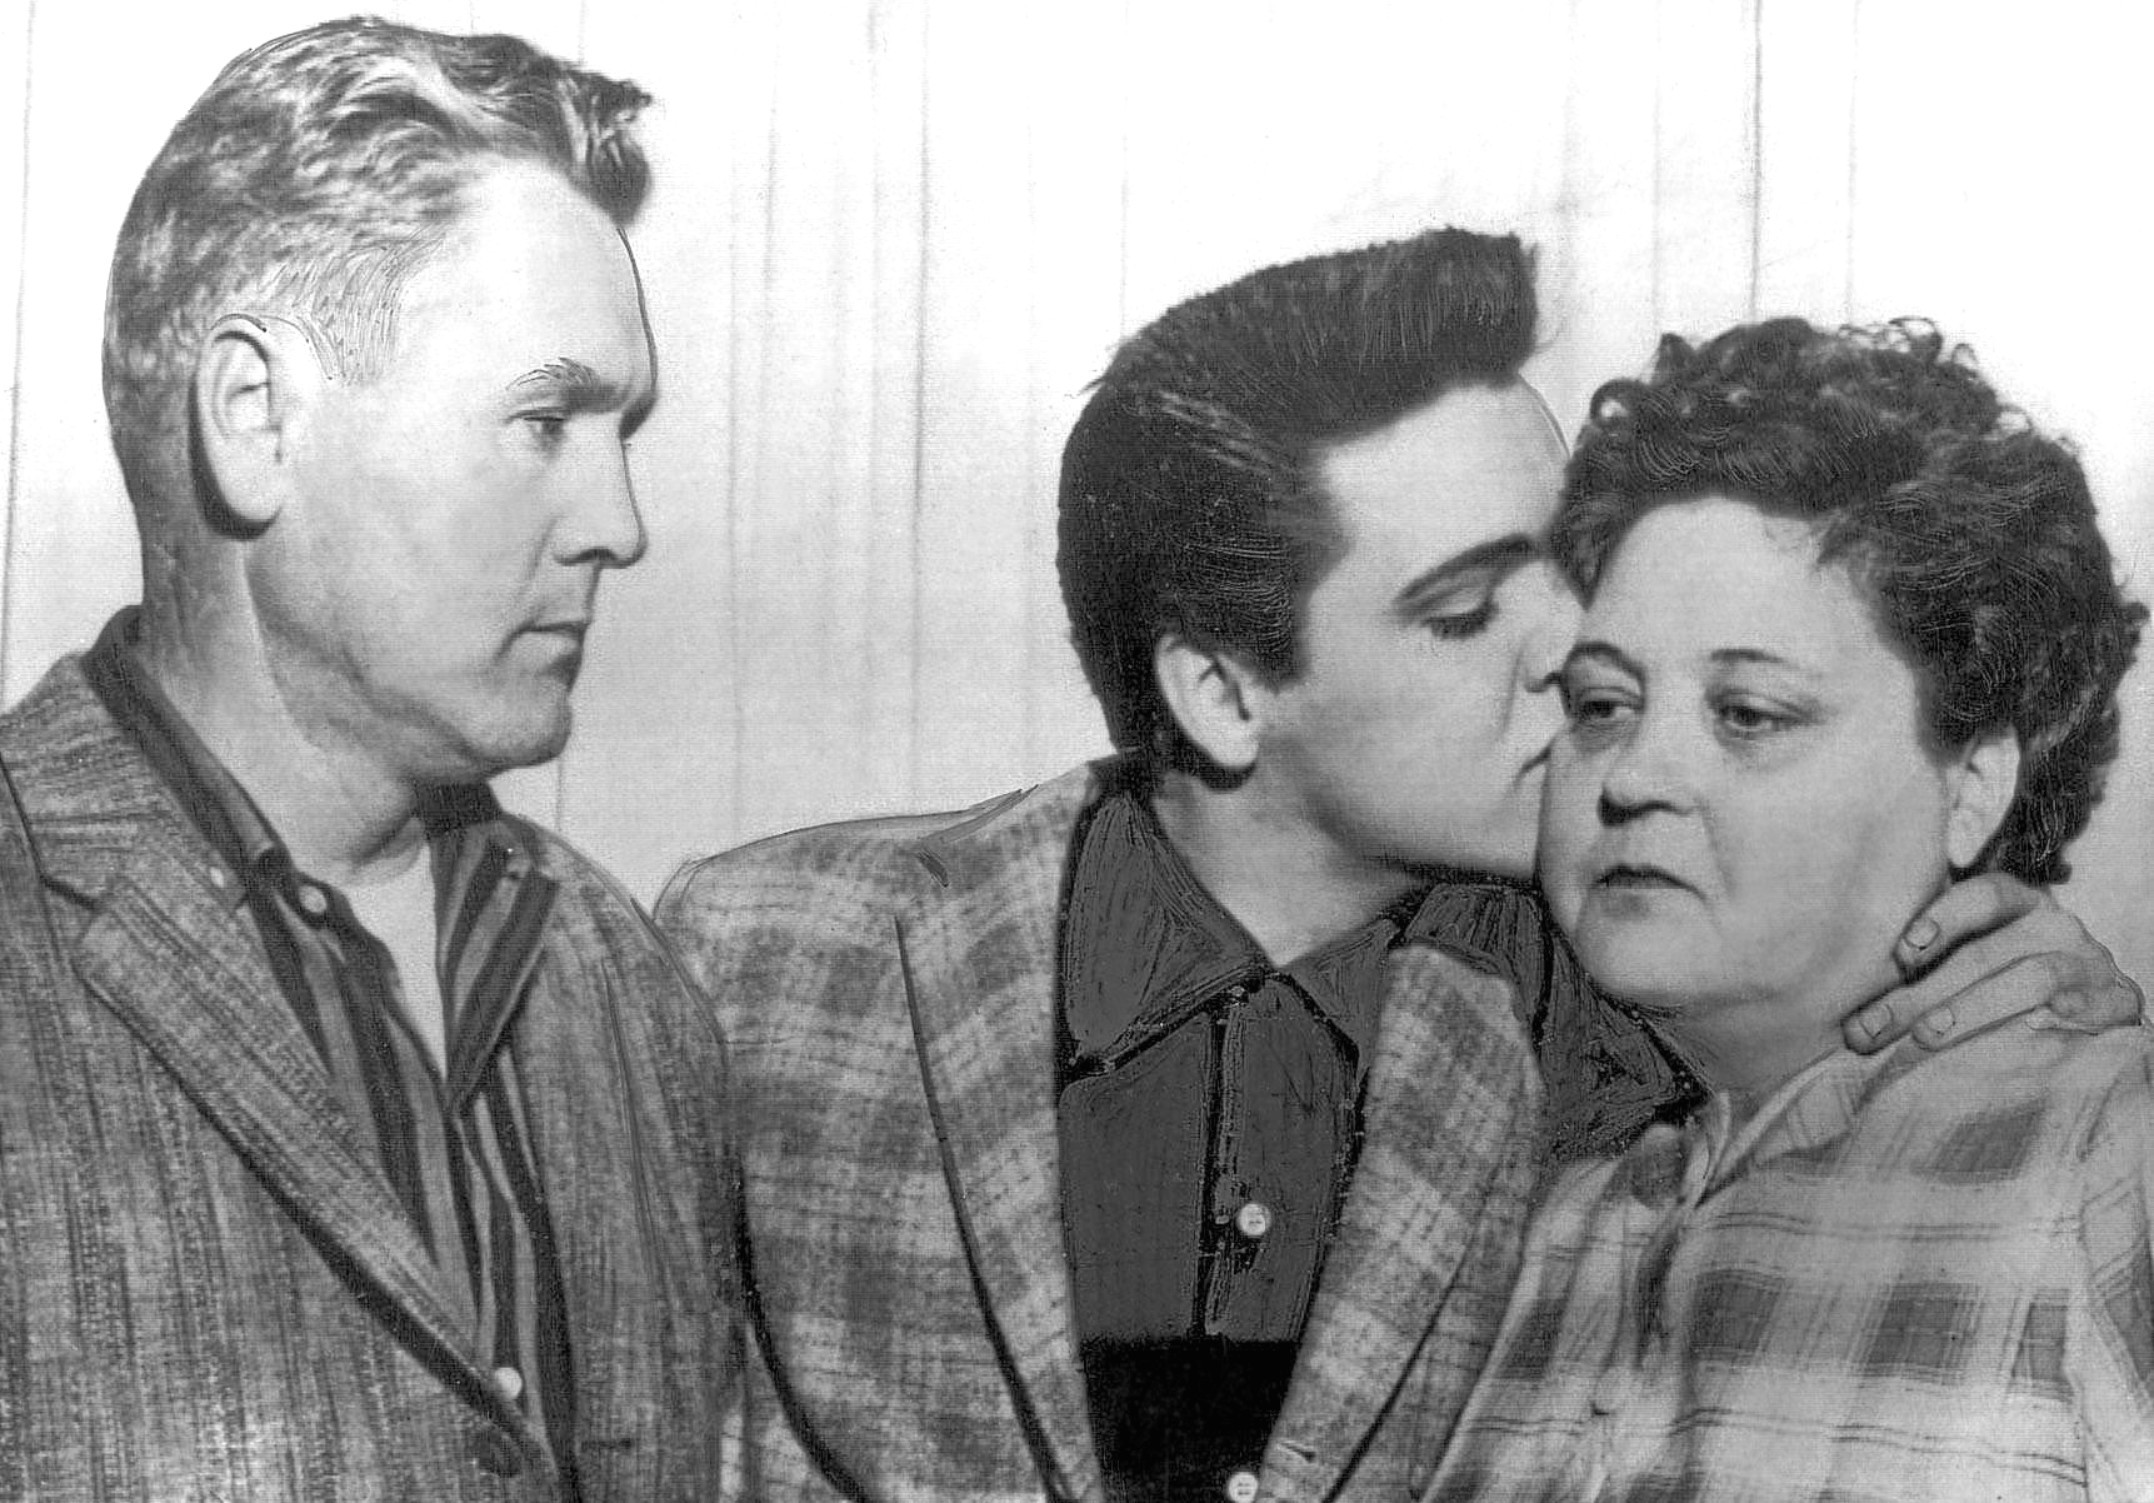 Elvis says goodbye to his dad, Vernon, and beloved mum, Gladys, as he prepares to enter the military (Everett Collection Inc / Alamy)